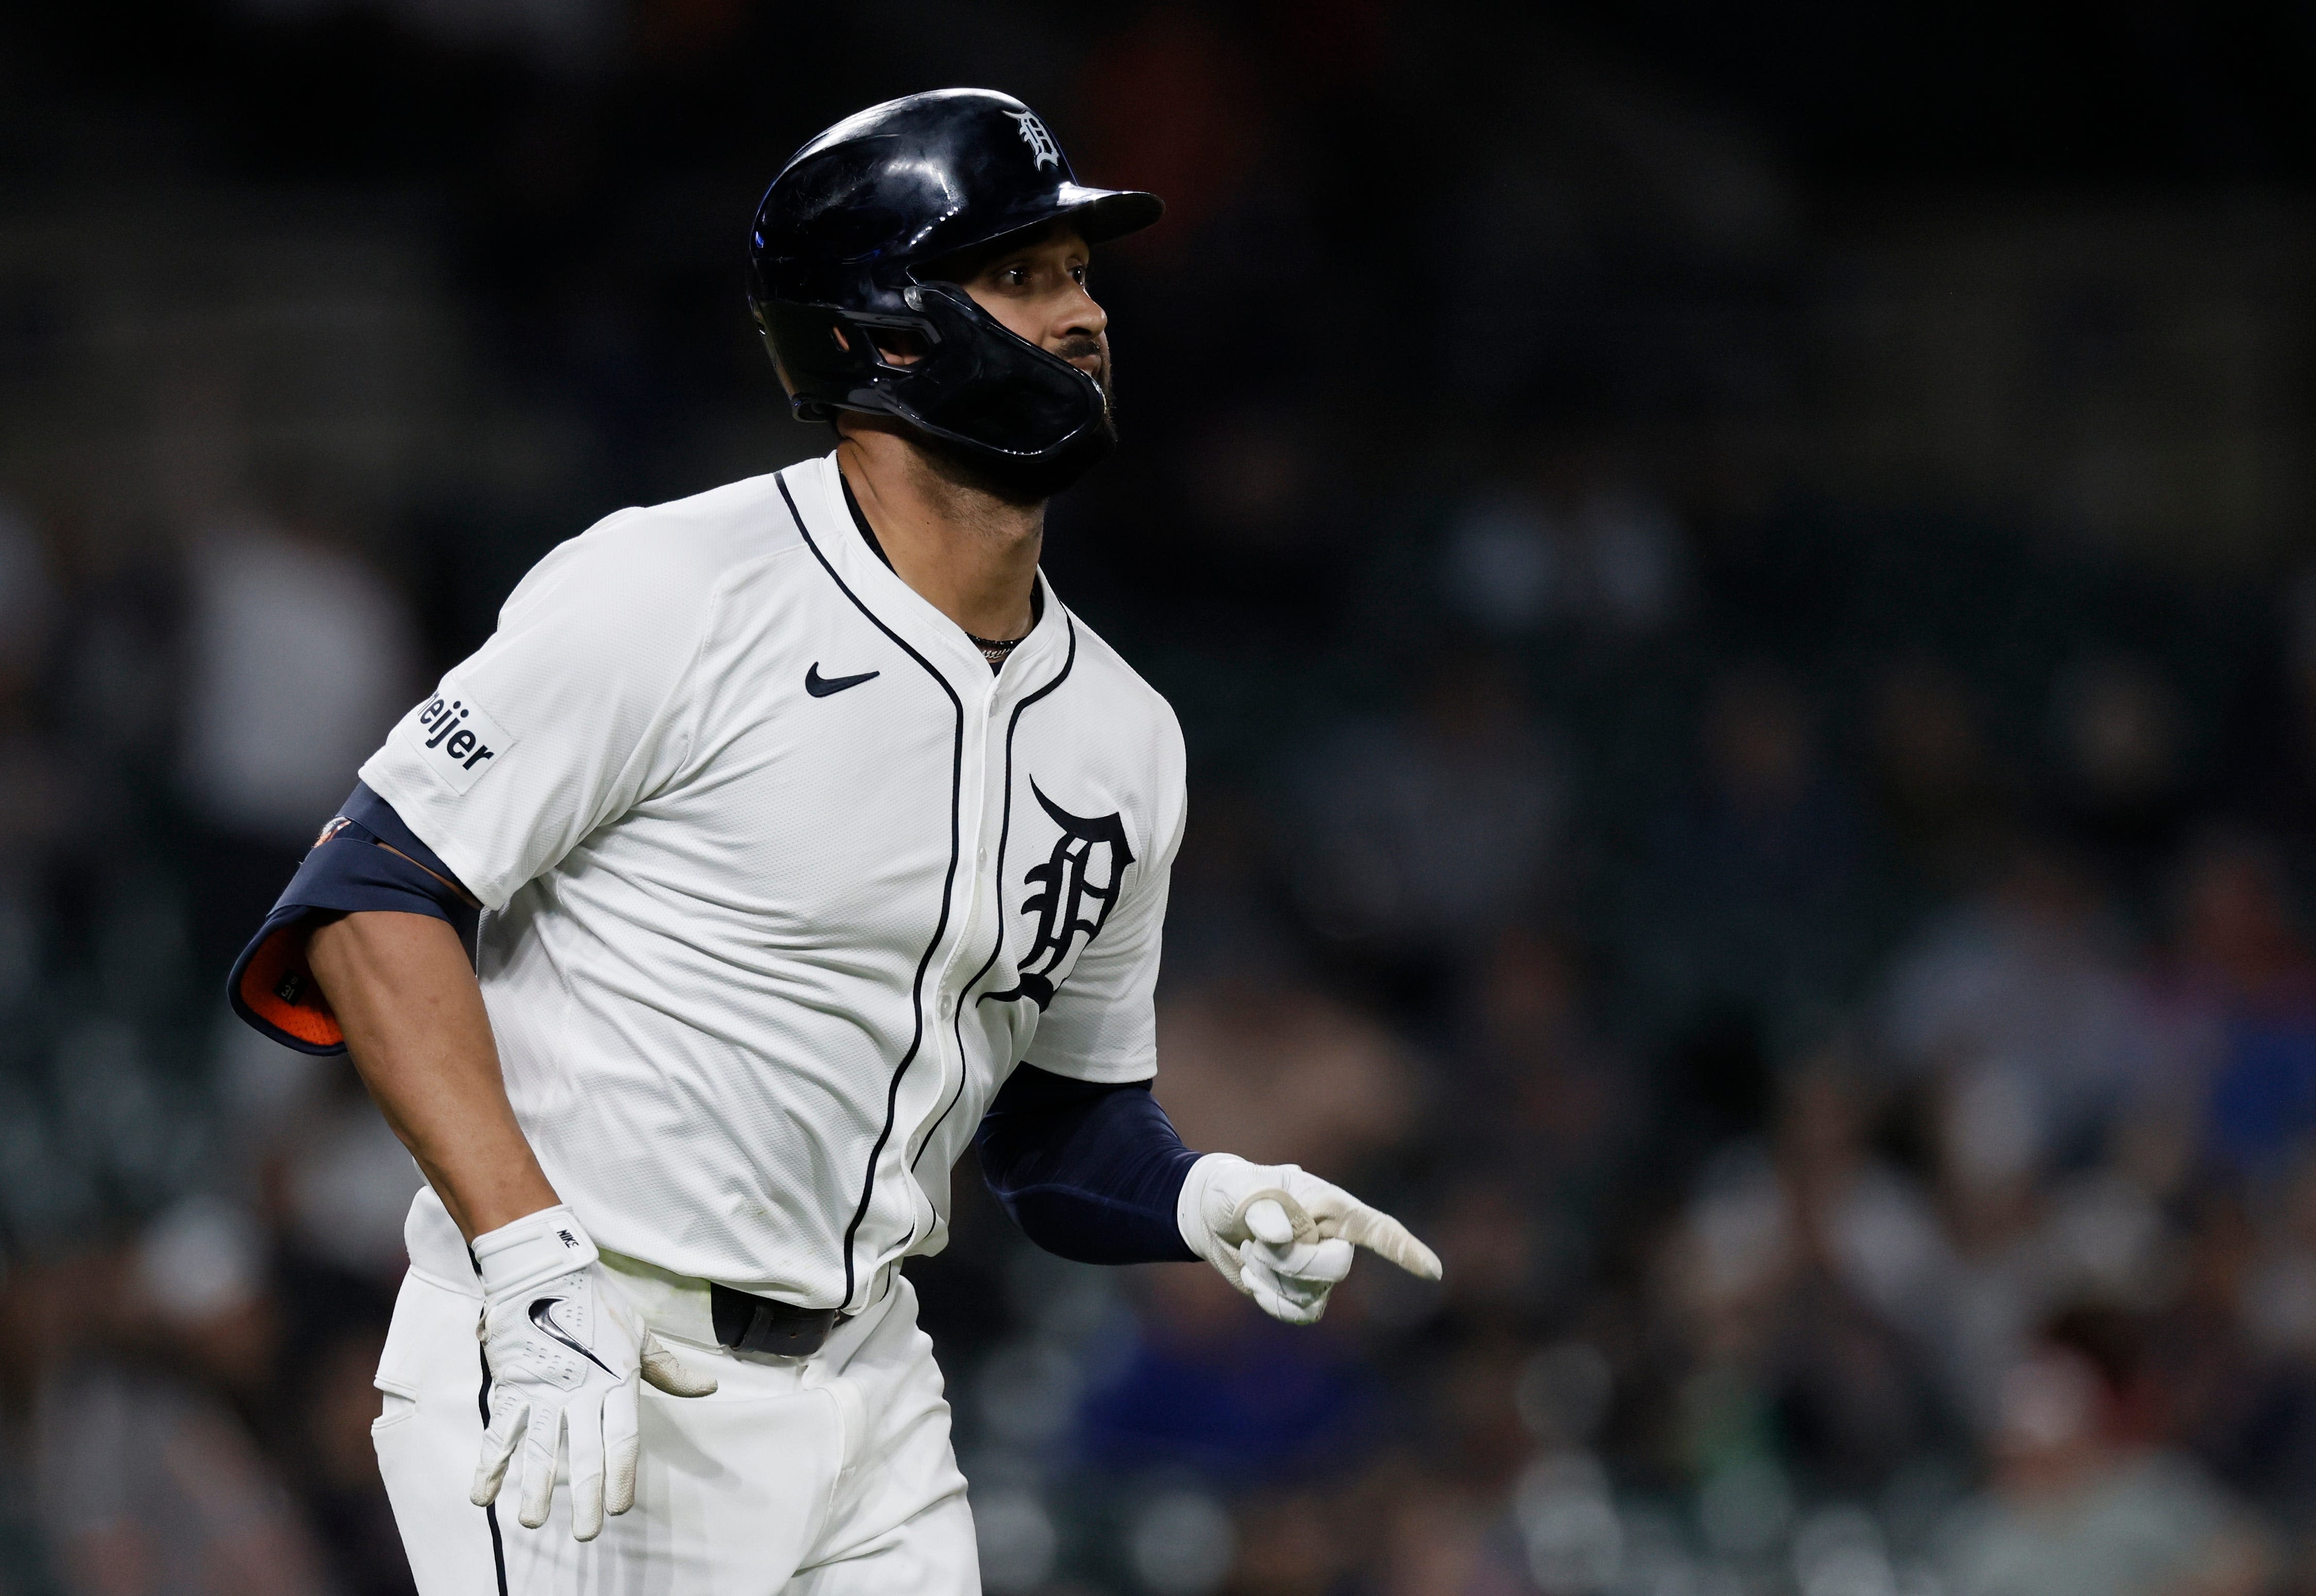 Detroit Tigers put themselves in 'great position' with above .500 record in April